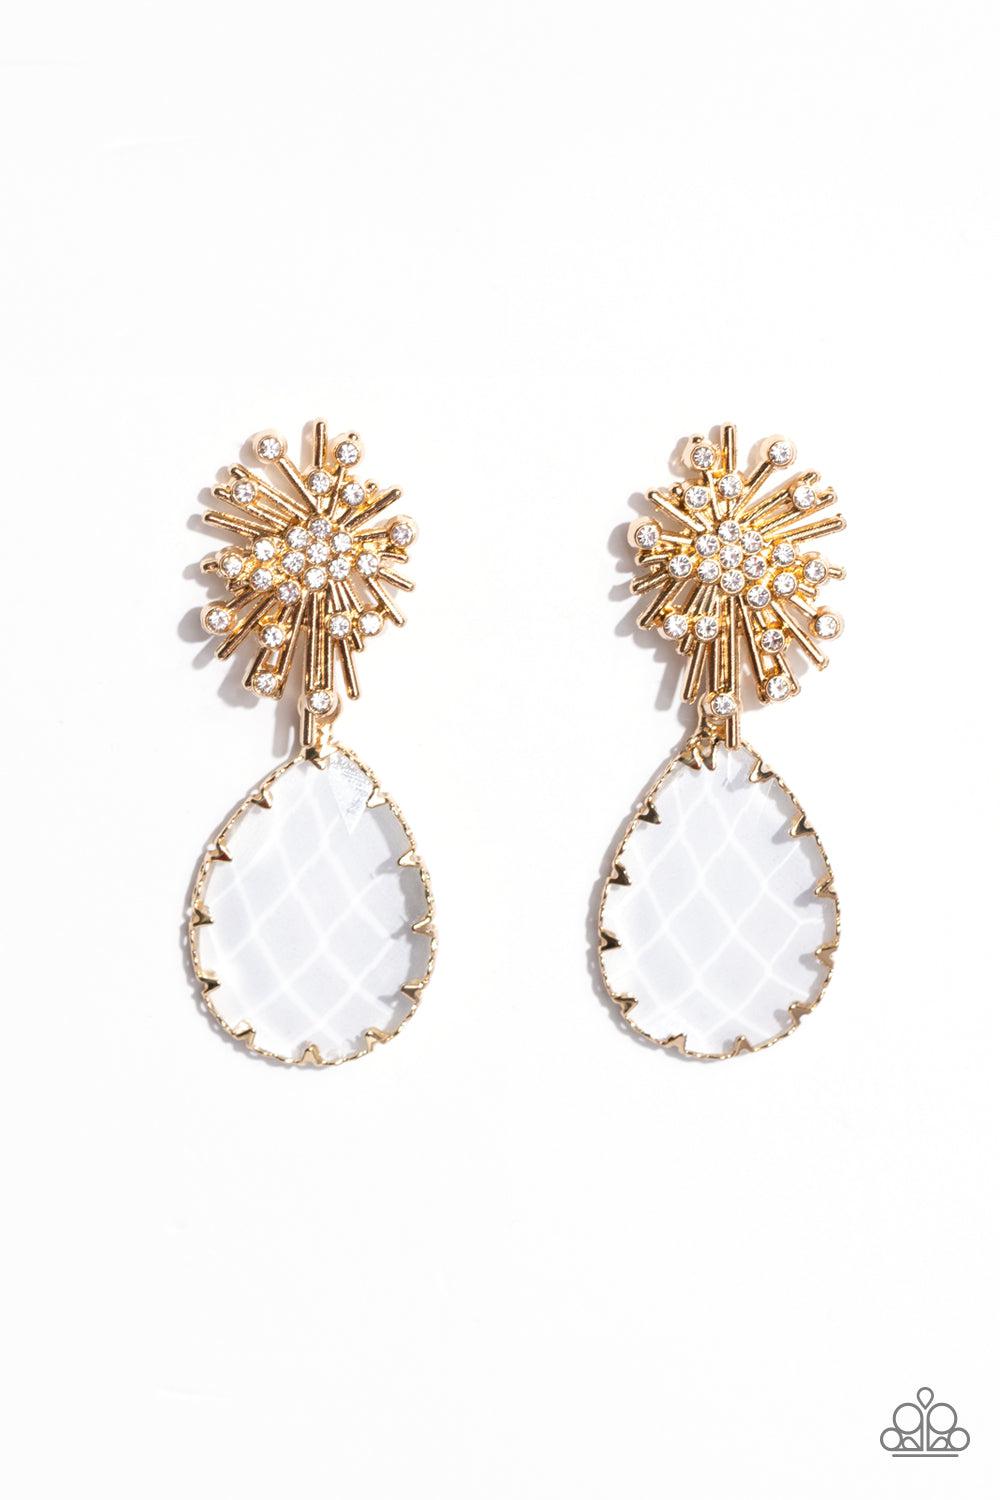 Stellar Shooting Star Gold &amp; White Gem Earrings - Paparazzi Accessories- lightbox - CarasShop.com - $5 Jewelry by Cara Jewels